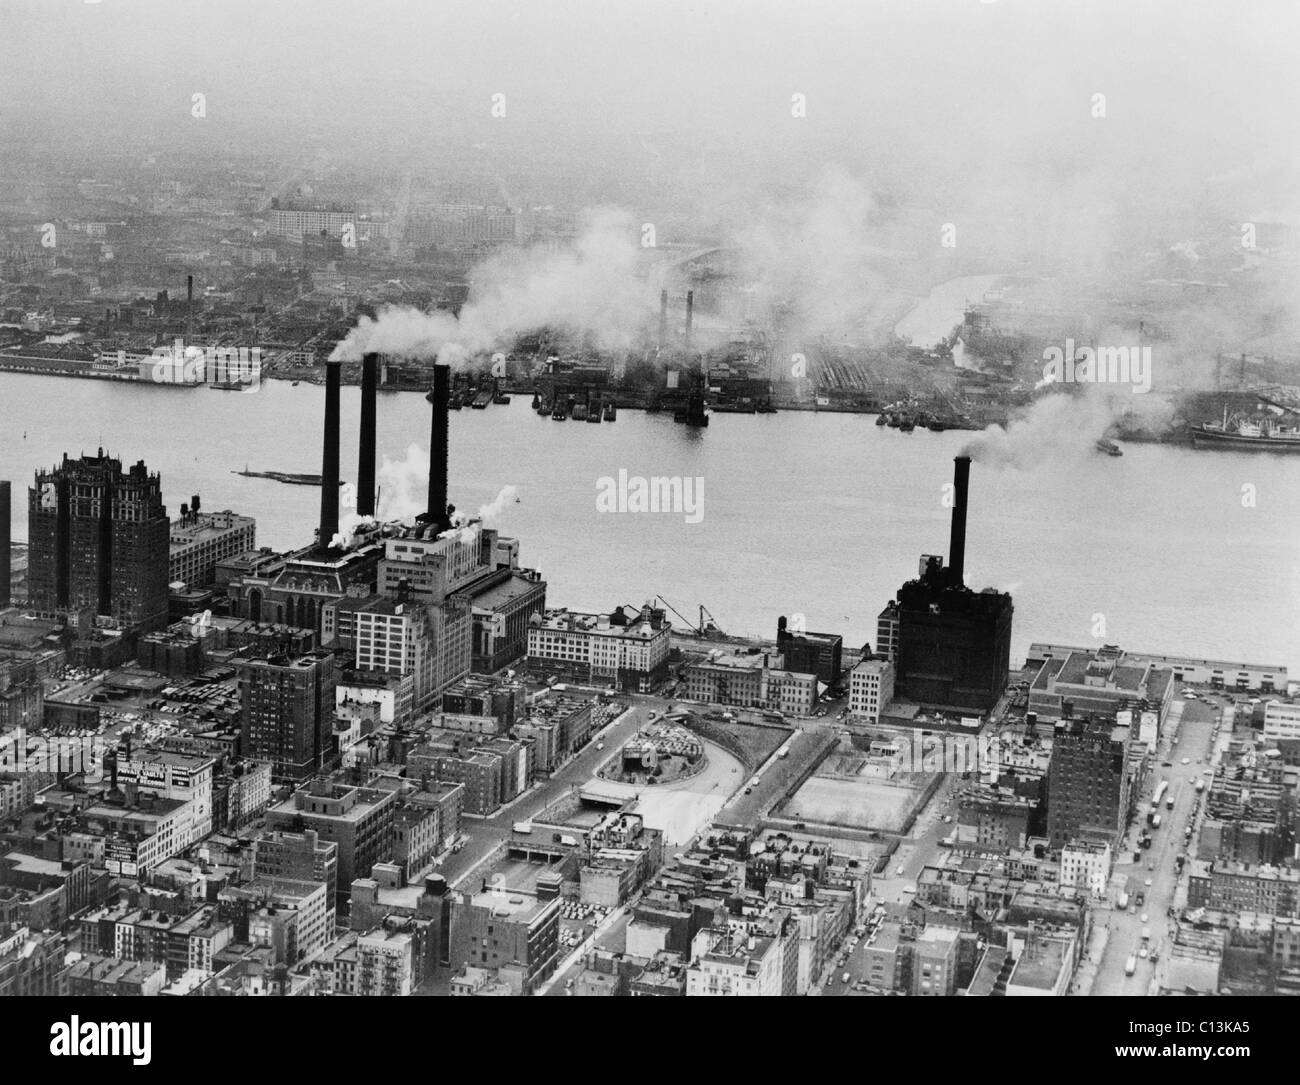 Smoke issues from stacks of Con Edison's coal powered electricity generating plant on the East River. New York City, February 15, 1951. Stock Photo